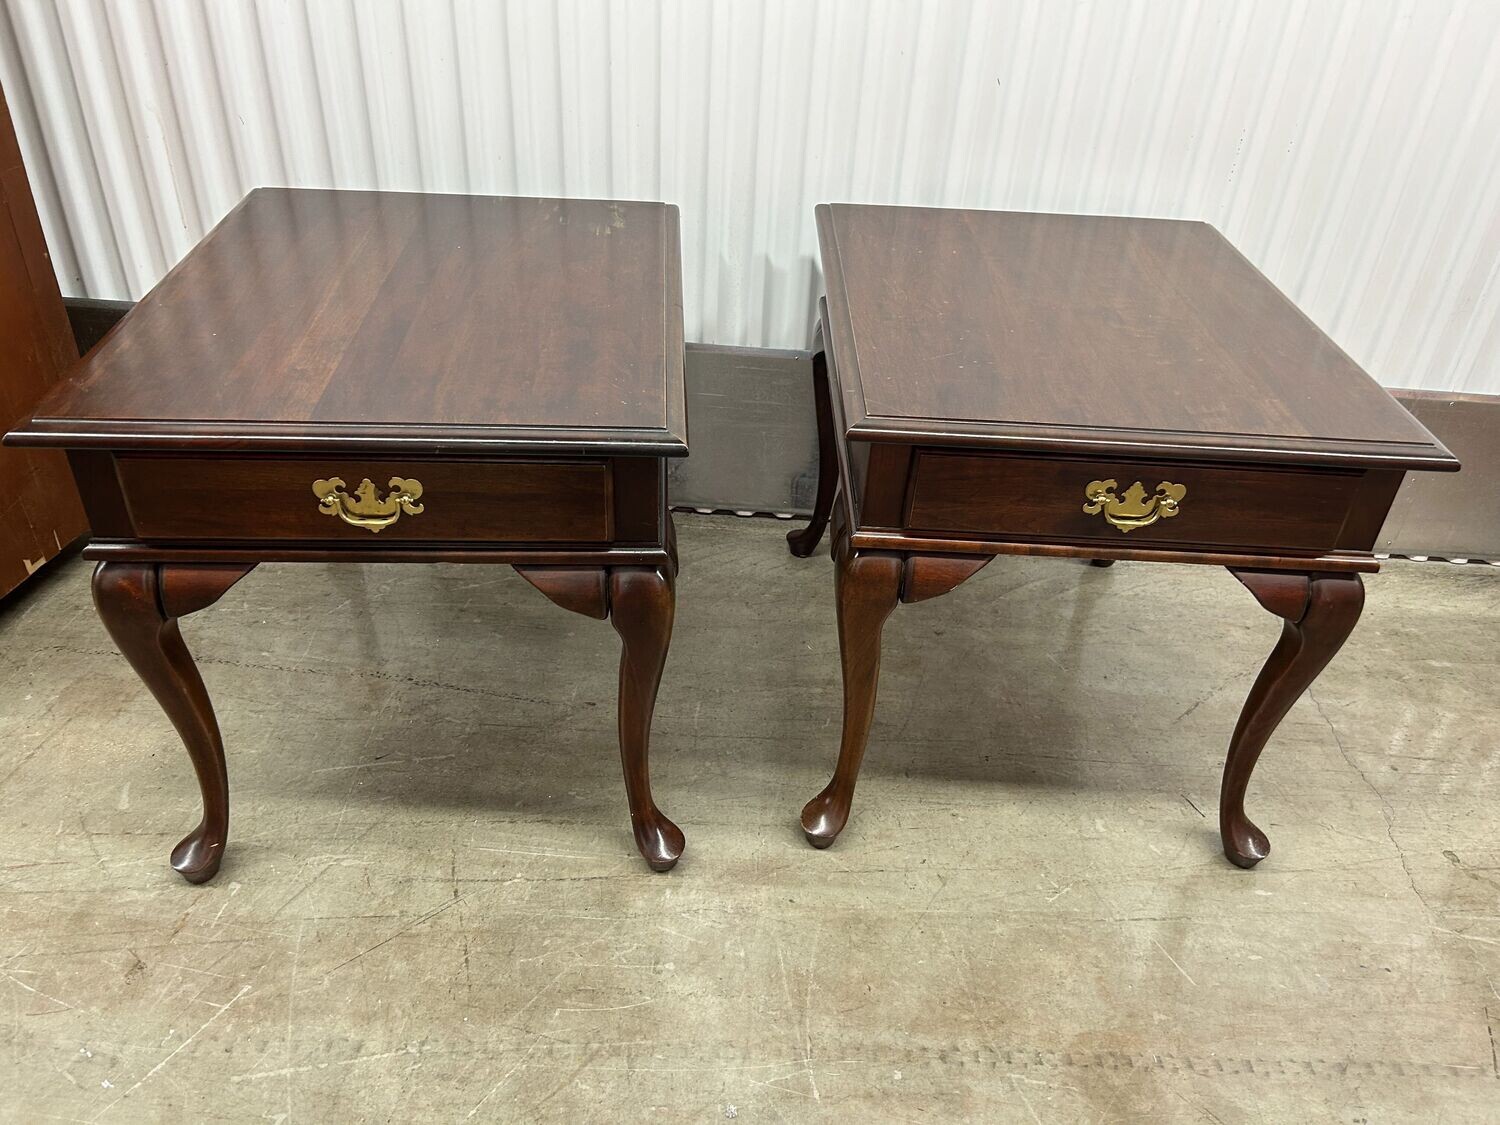 Set: 2 Queen Anne style End Tables, cherry #2213